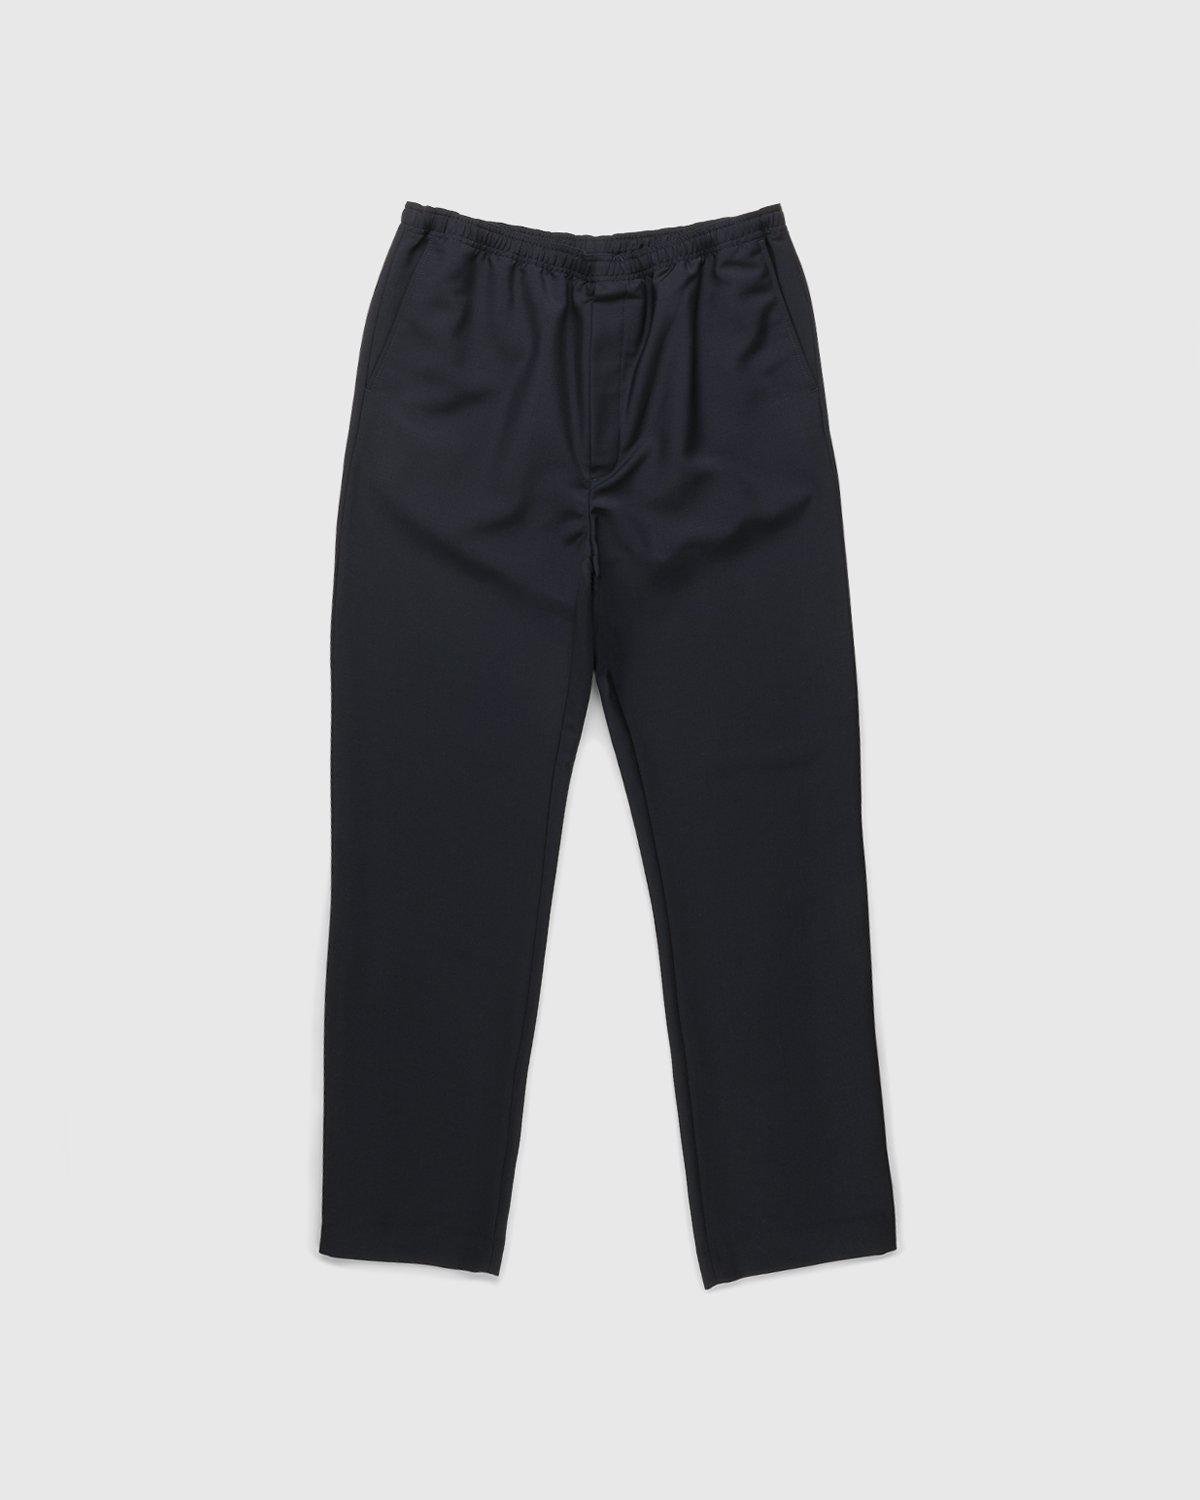 Acne Studios – Mohair Blend Drawstring Trousers Navy by ACNE STUDIOS